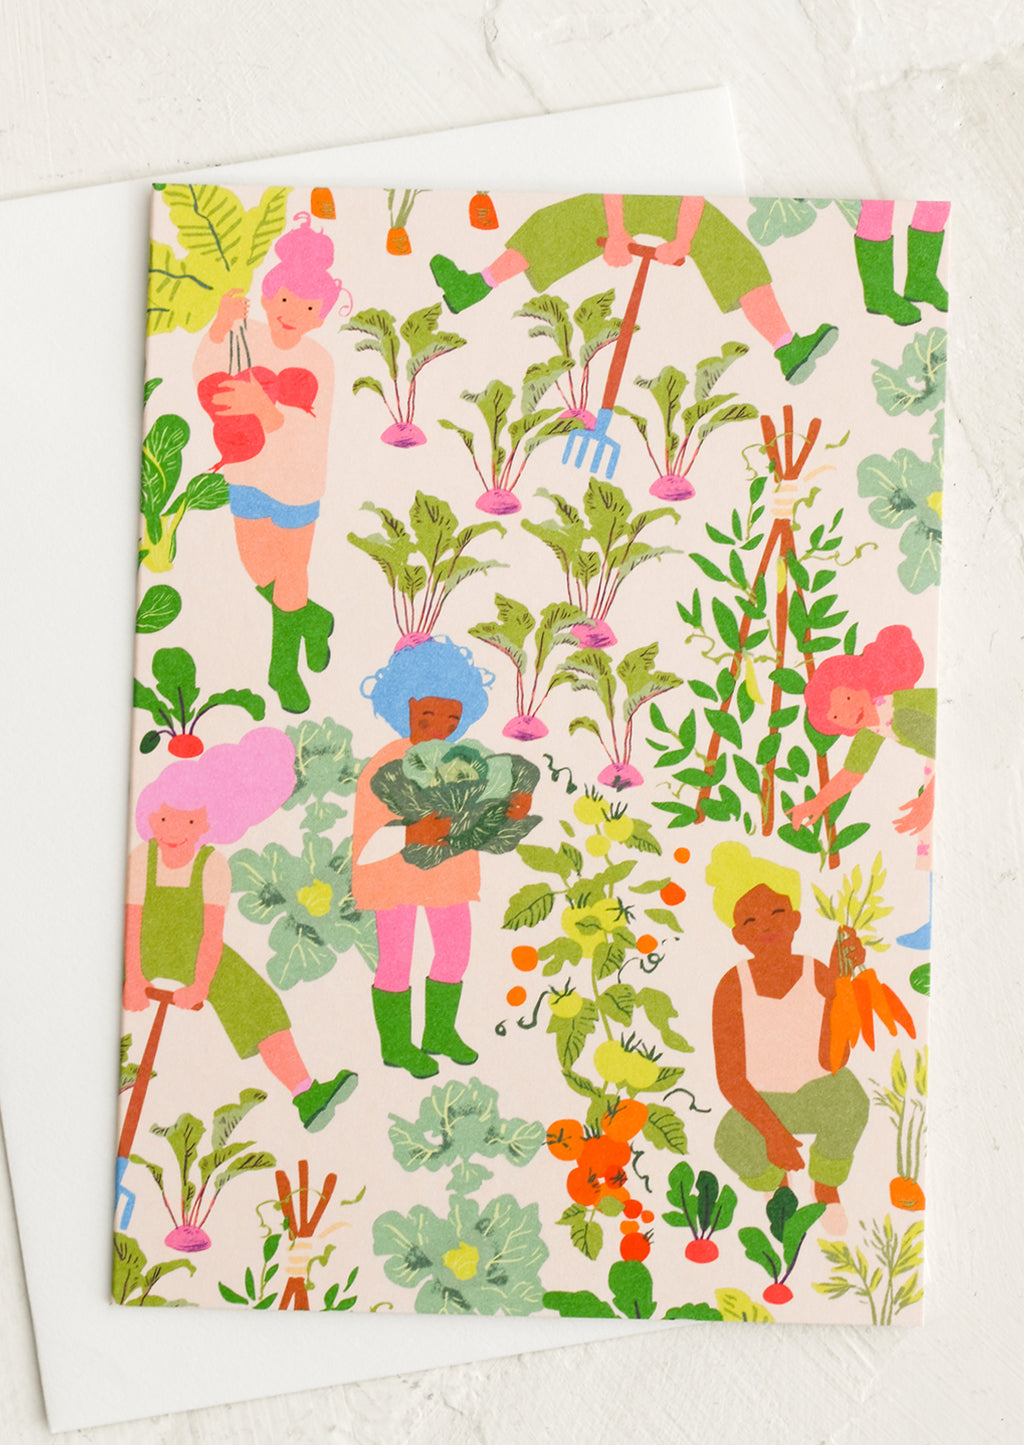 2: Greeting cards with colorful and cartoon-y women gardening print.